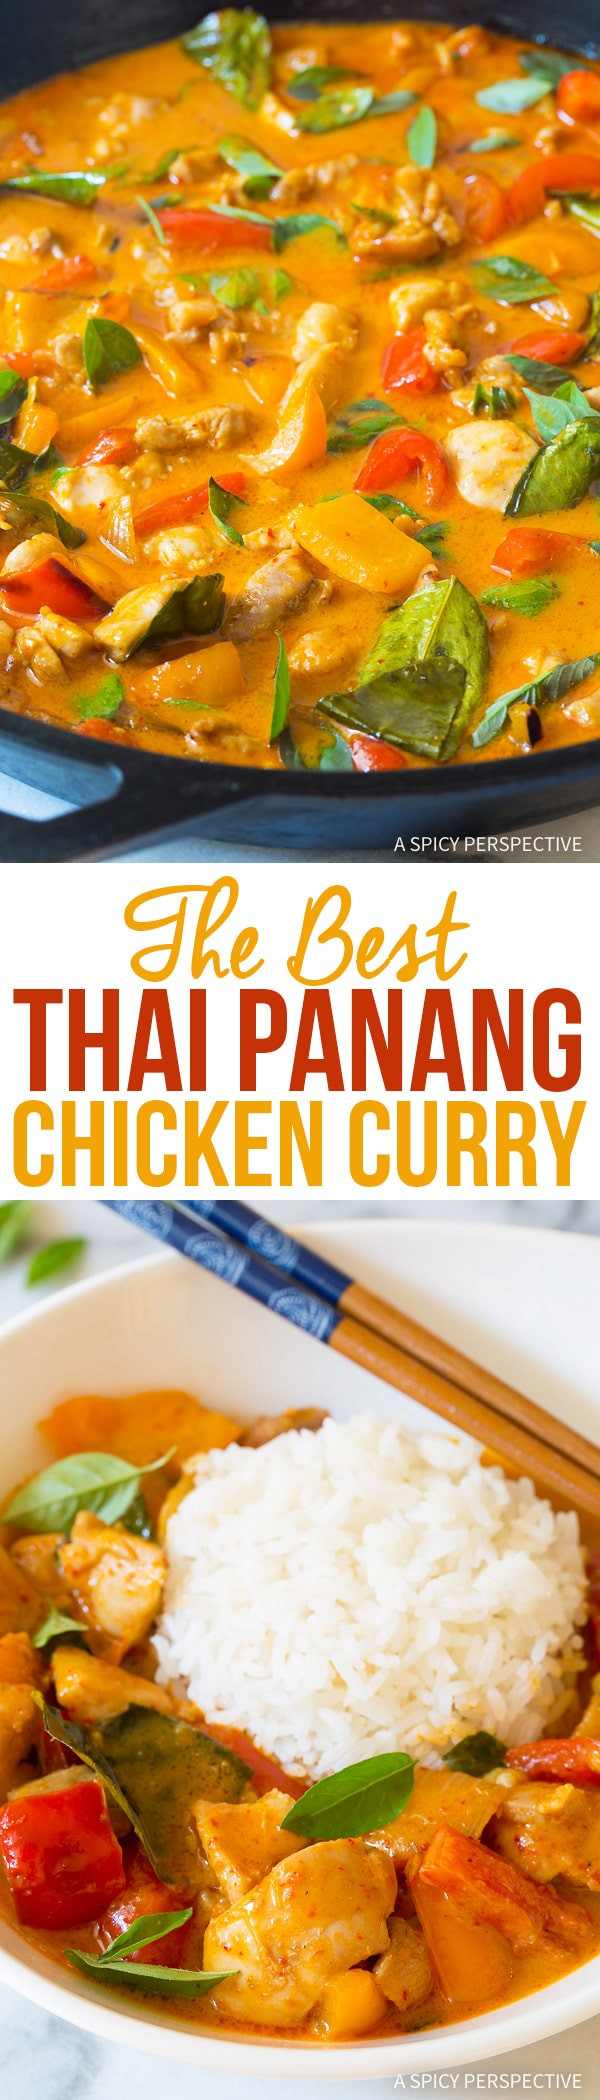 Thai Panang Curry Recipes
 The Best Thai Panang Chicken Curry A Spicy Perspective